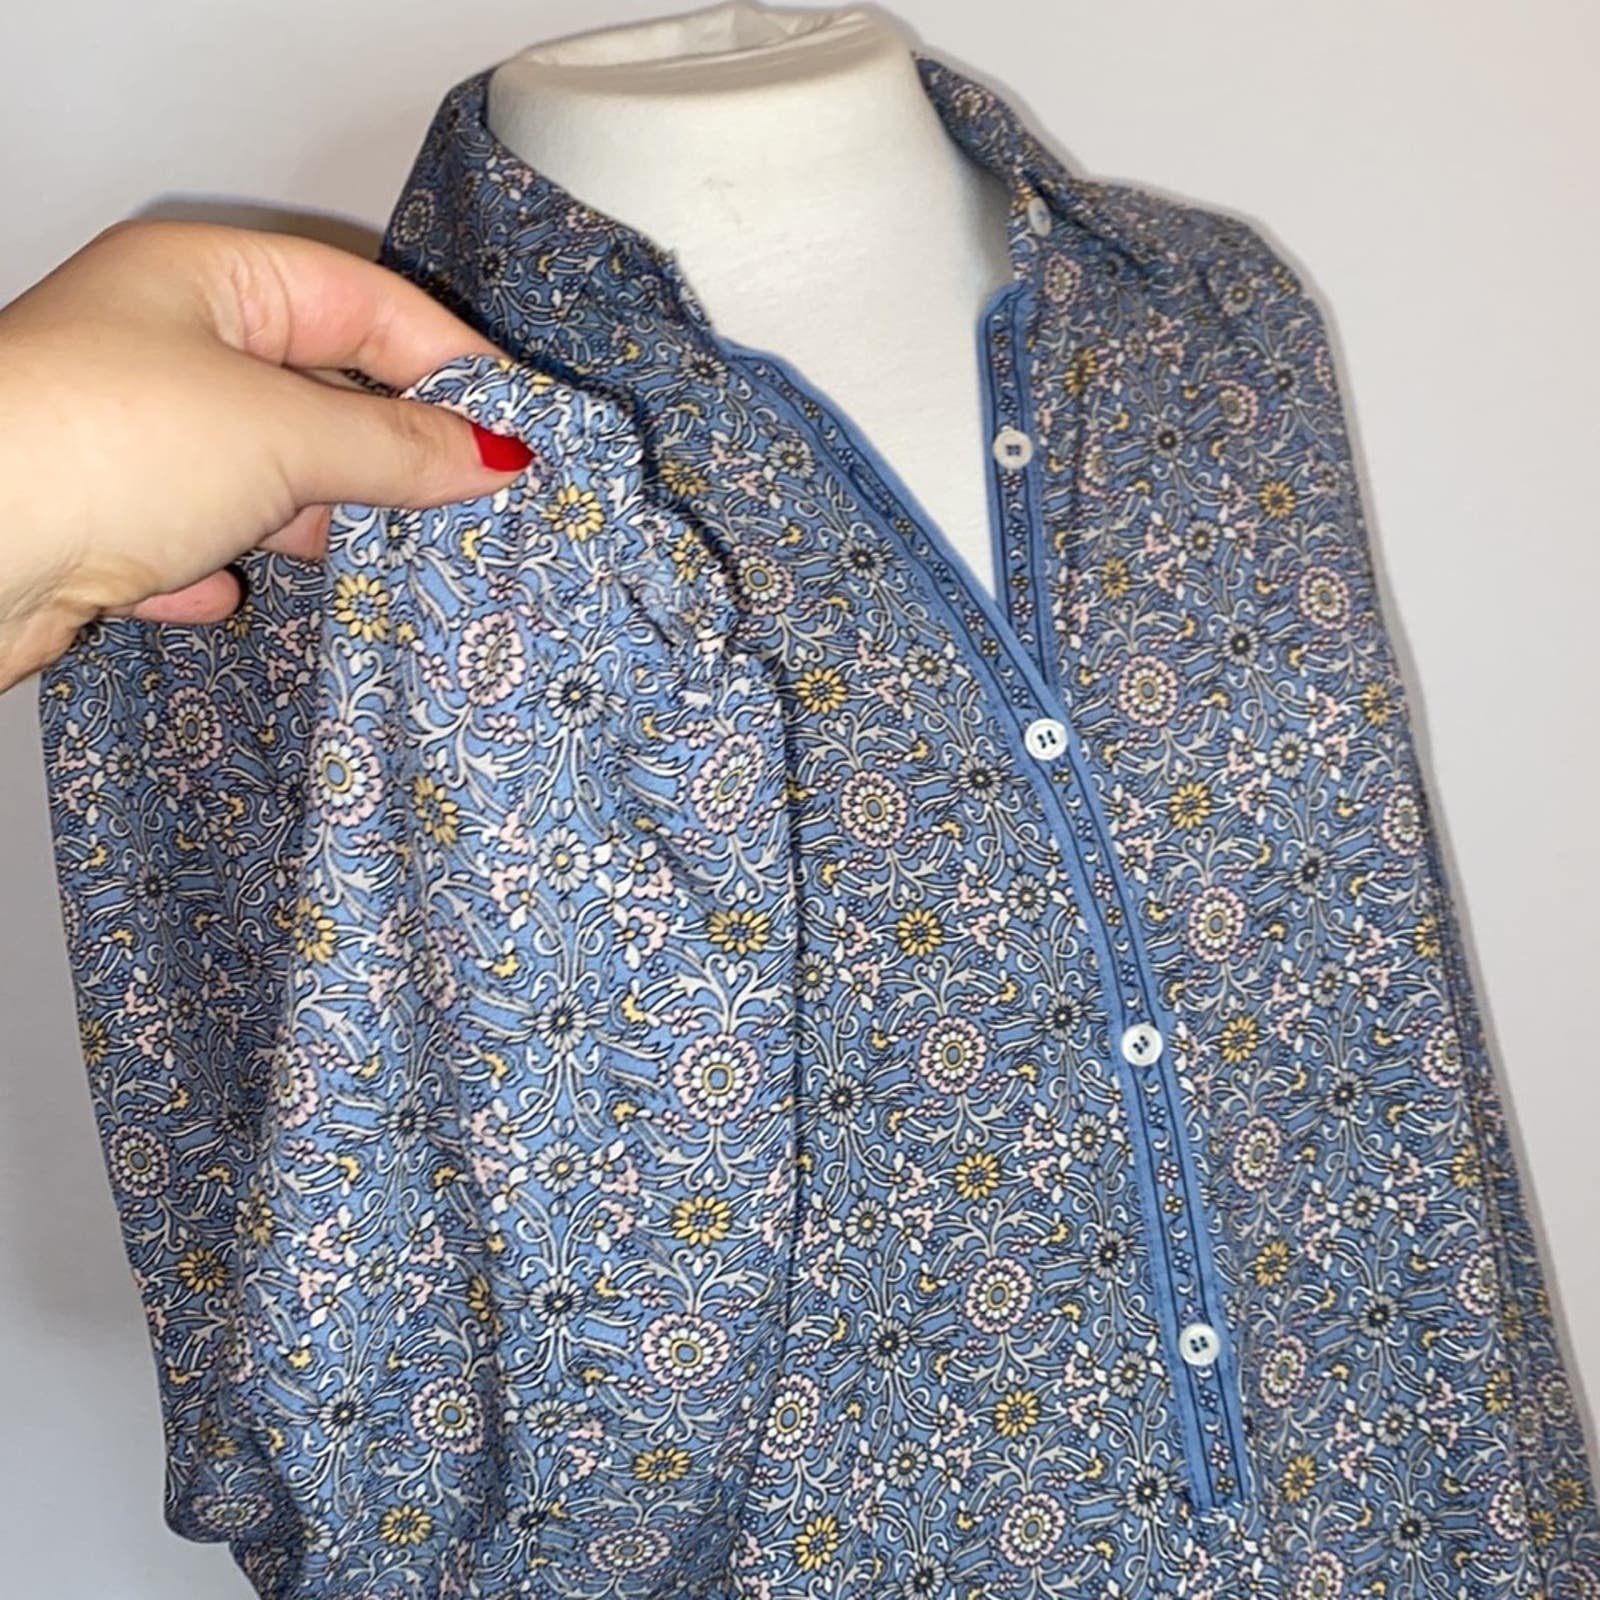 Buy Max Studio Small Blue Floral Crepe Long Sleeve Collar Shirt Lightweight Blouse nz7FYNY7R Online Exclusive